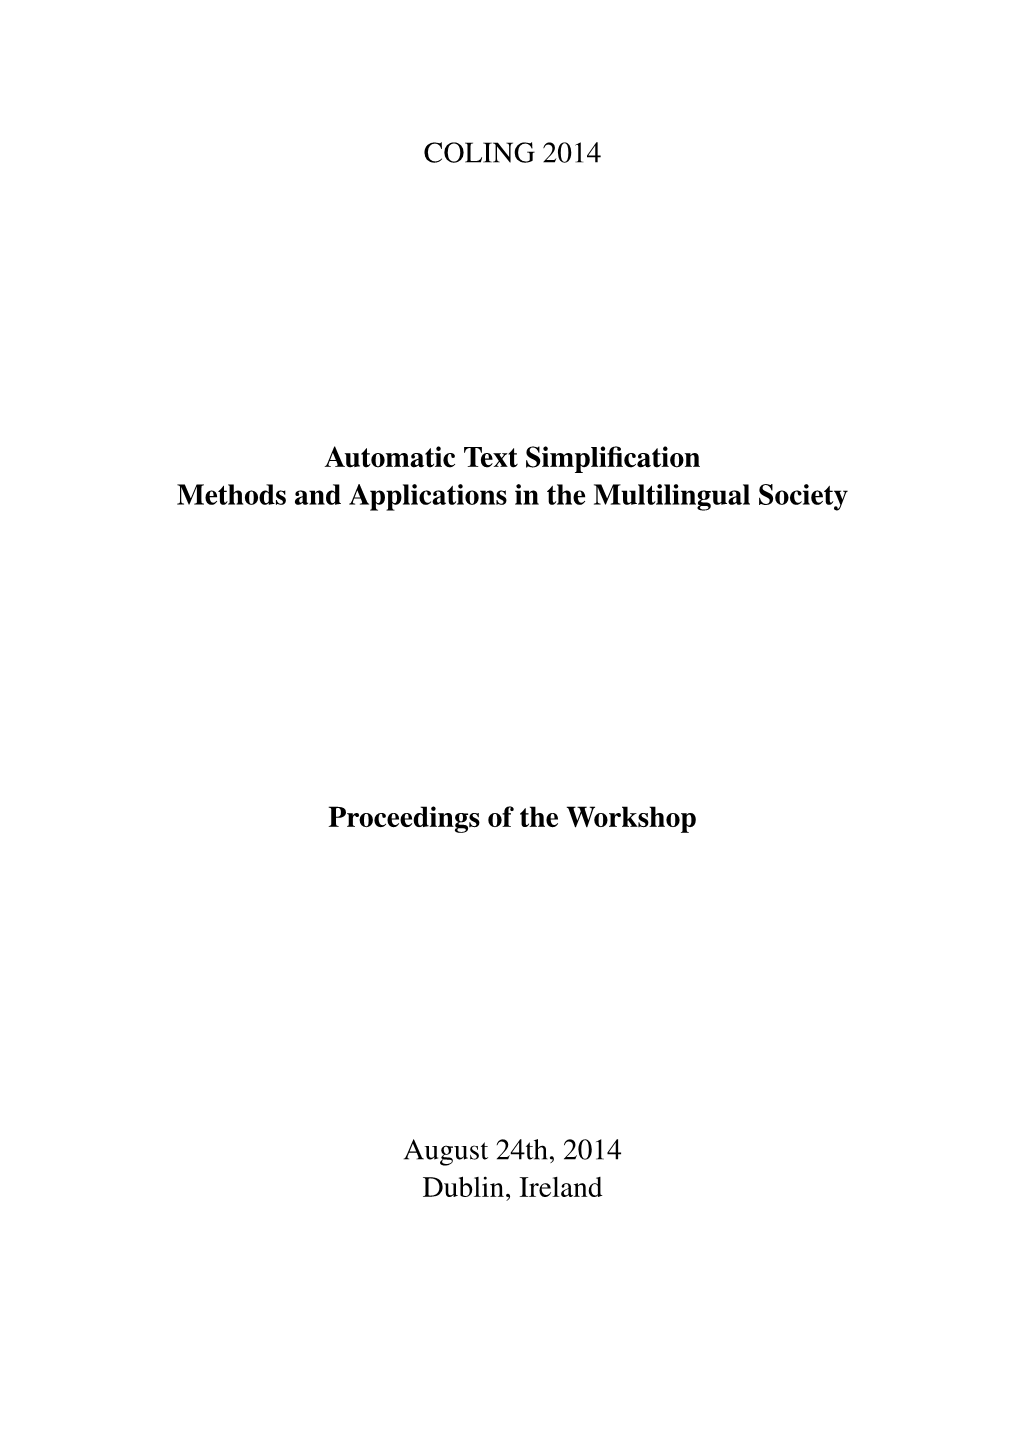 Proceedings of the Workshop on Automatic Text Simplification